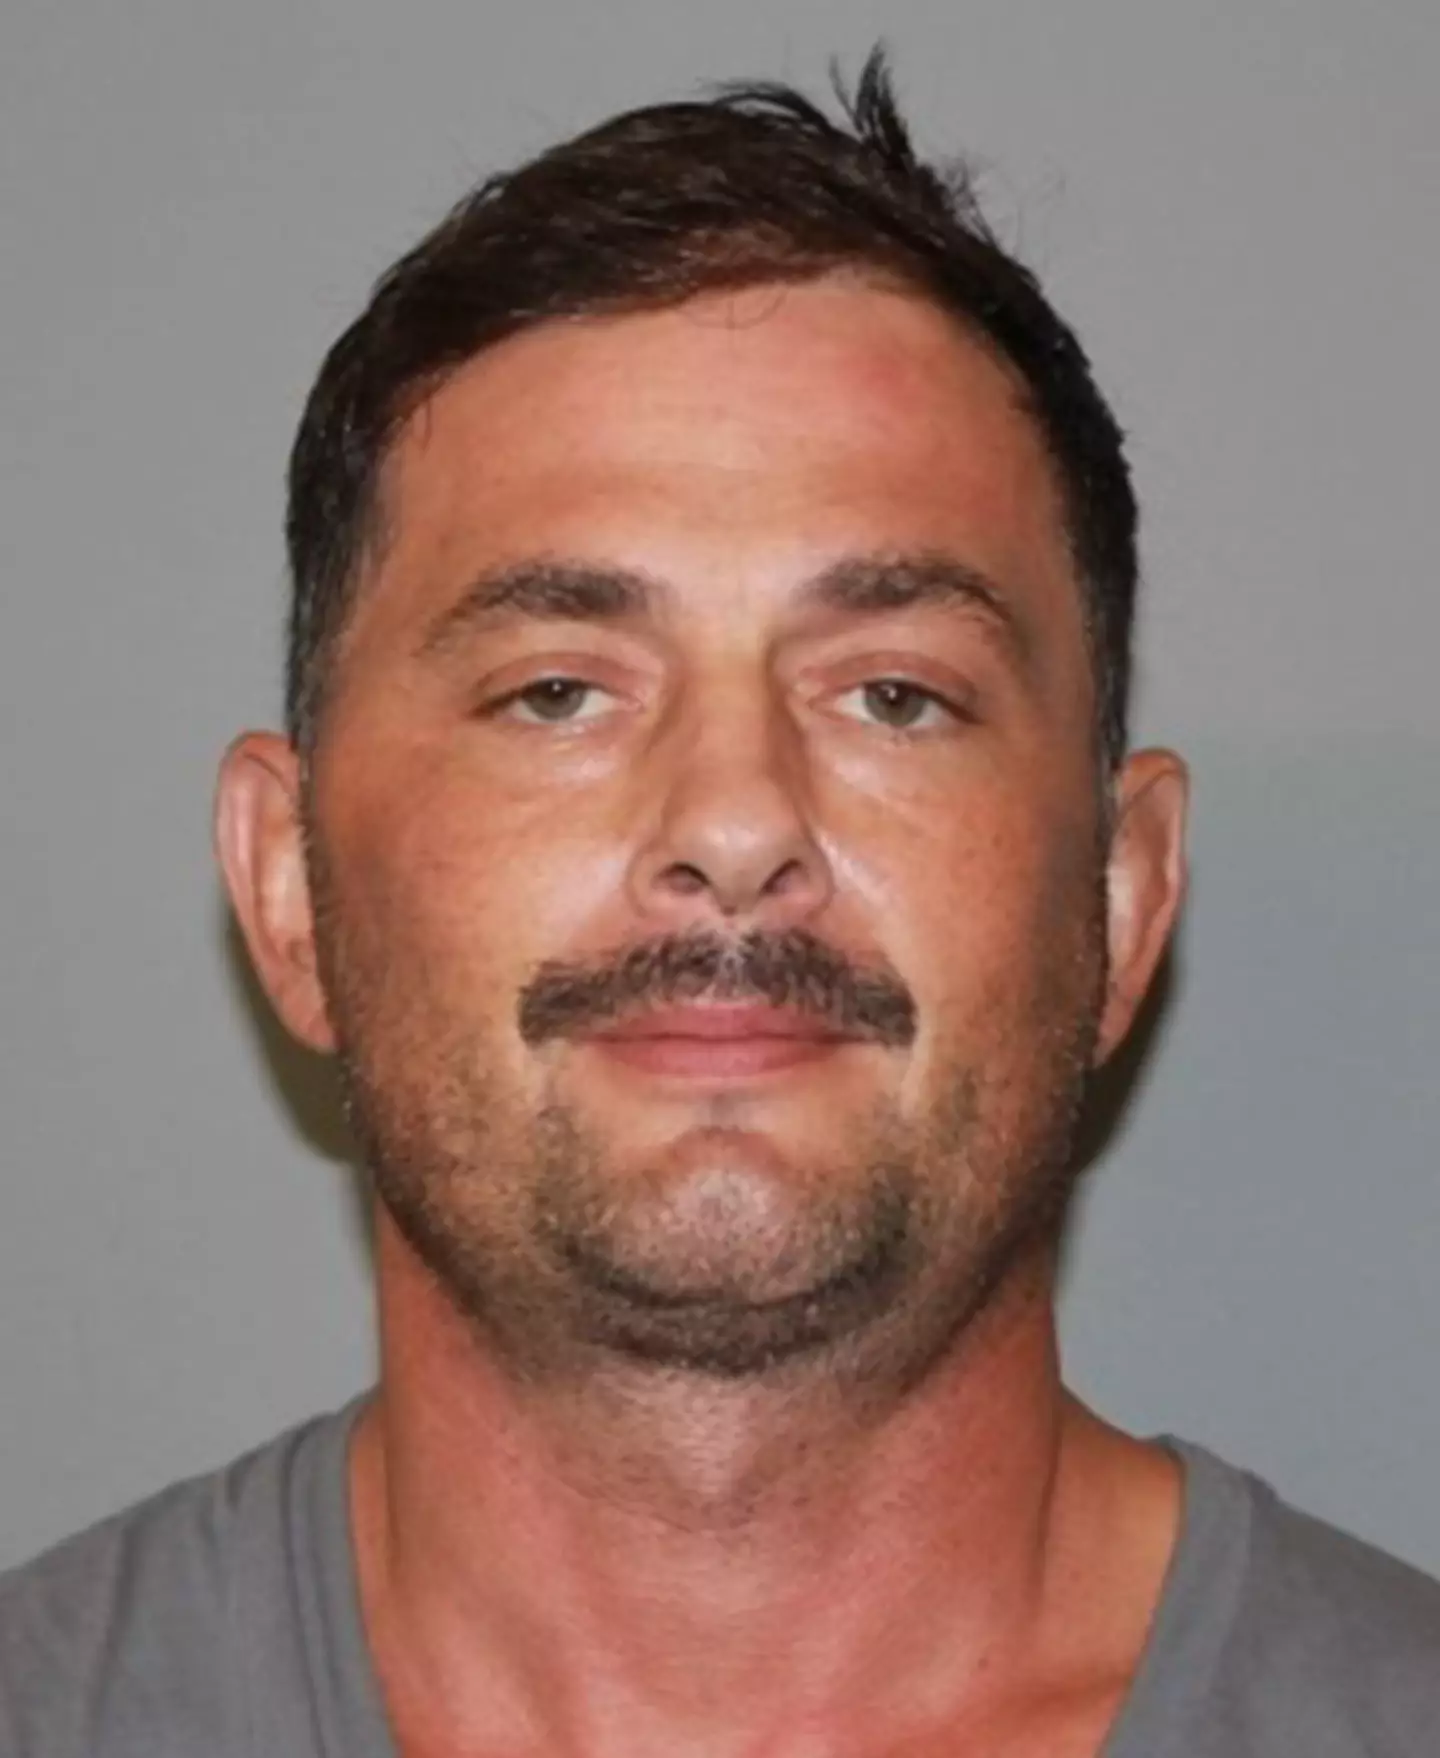 Jacob Wilhoit, 41, was arrested.